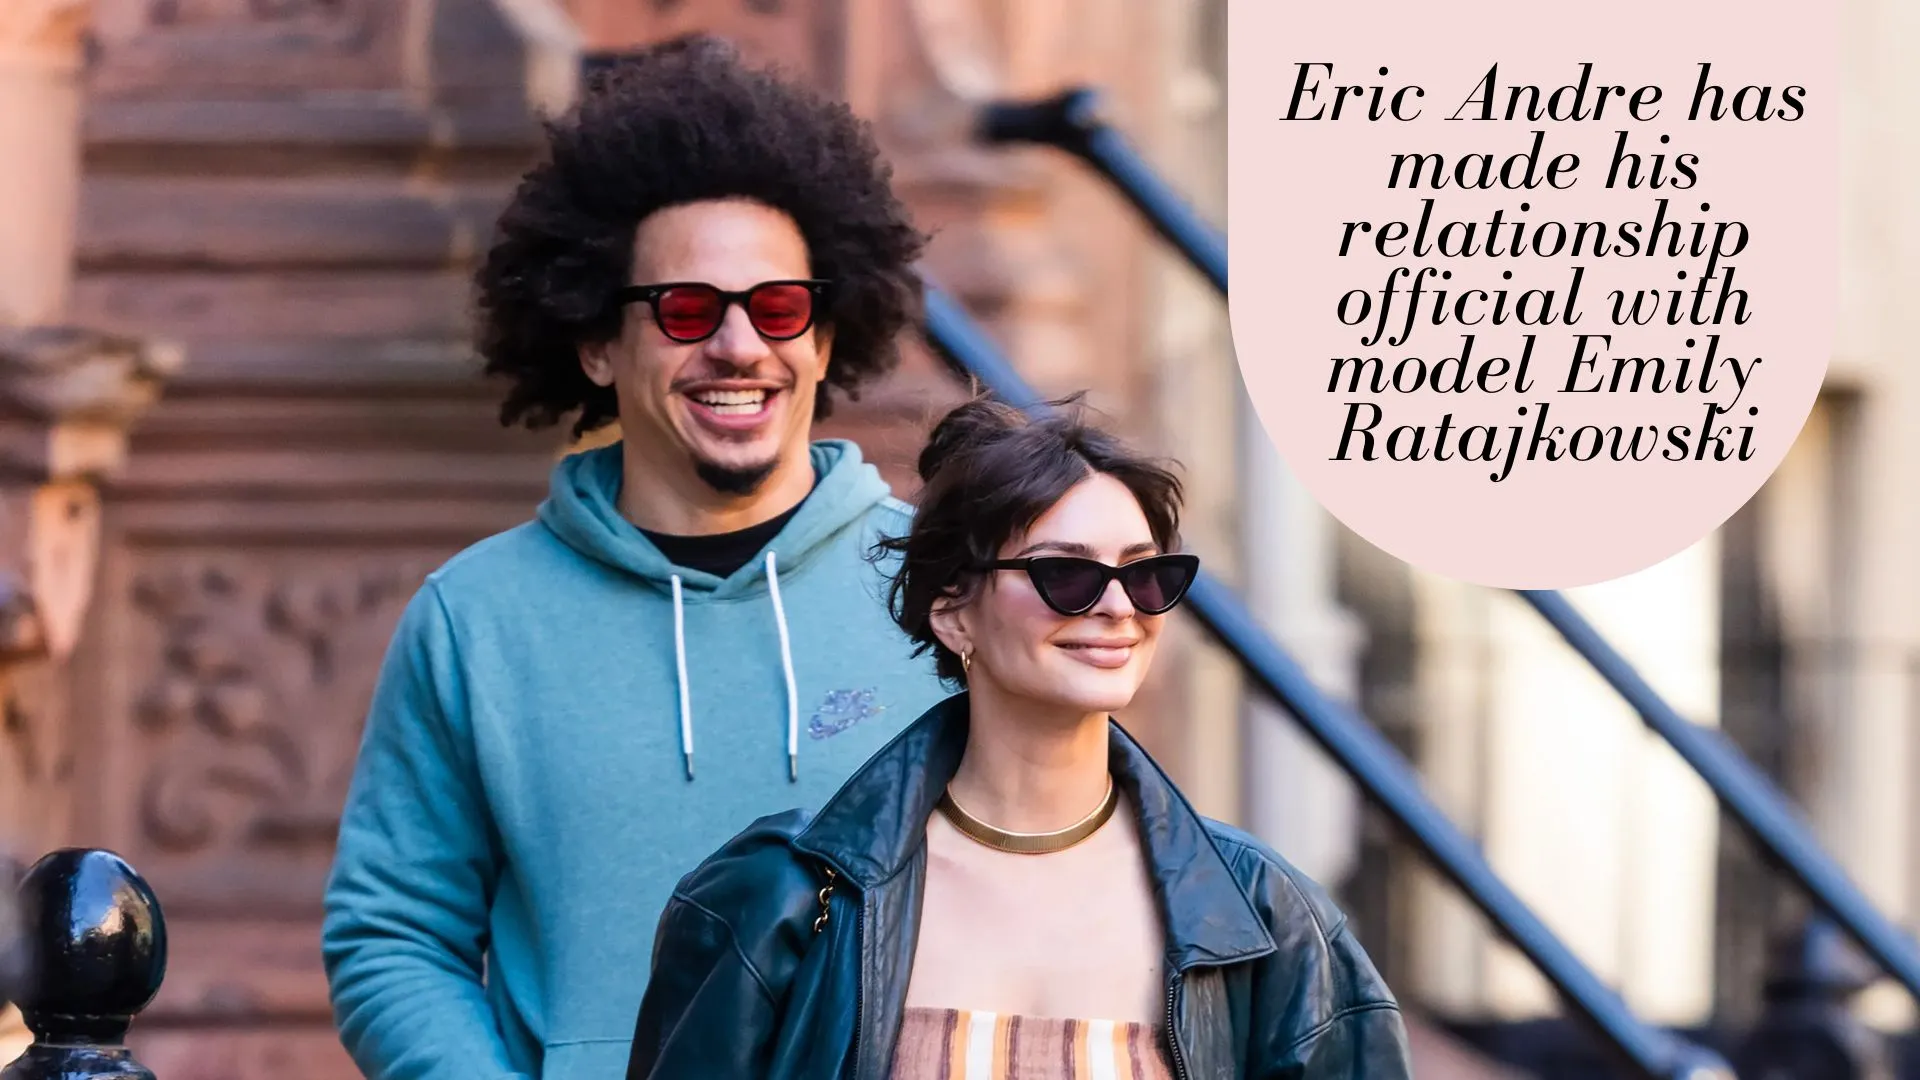 Eric Andre has made his relationship official with model Emily Ratajkowski (Image credit: vanityfair)